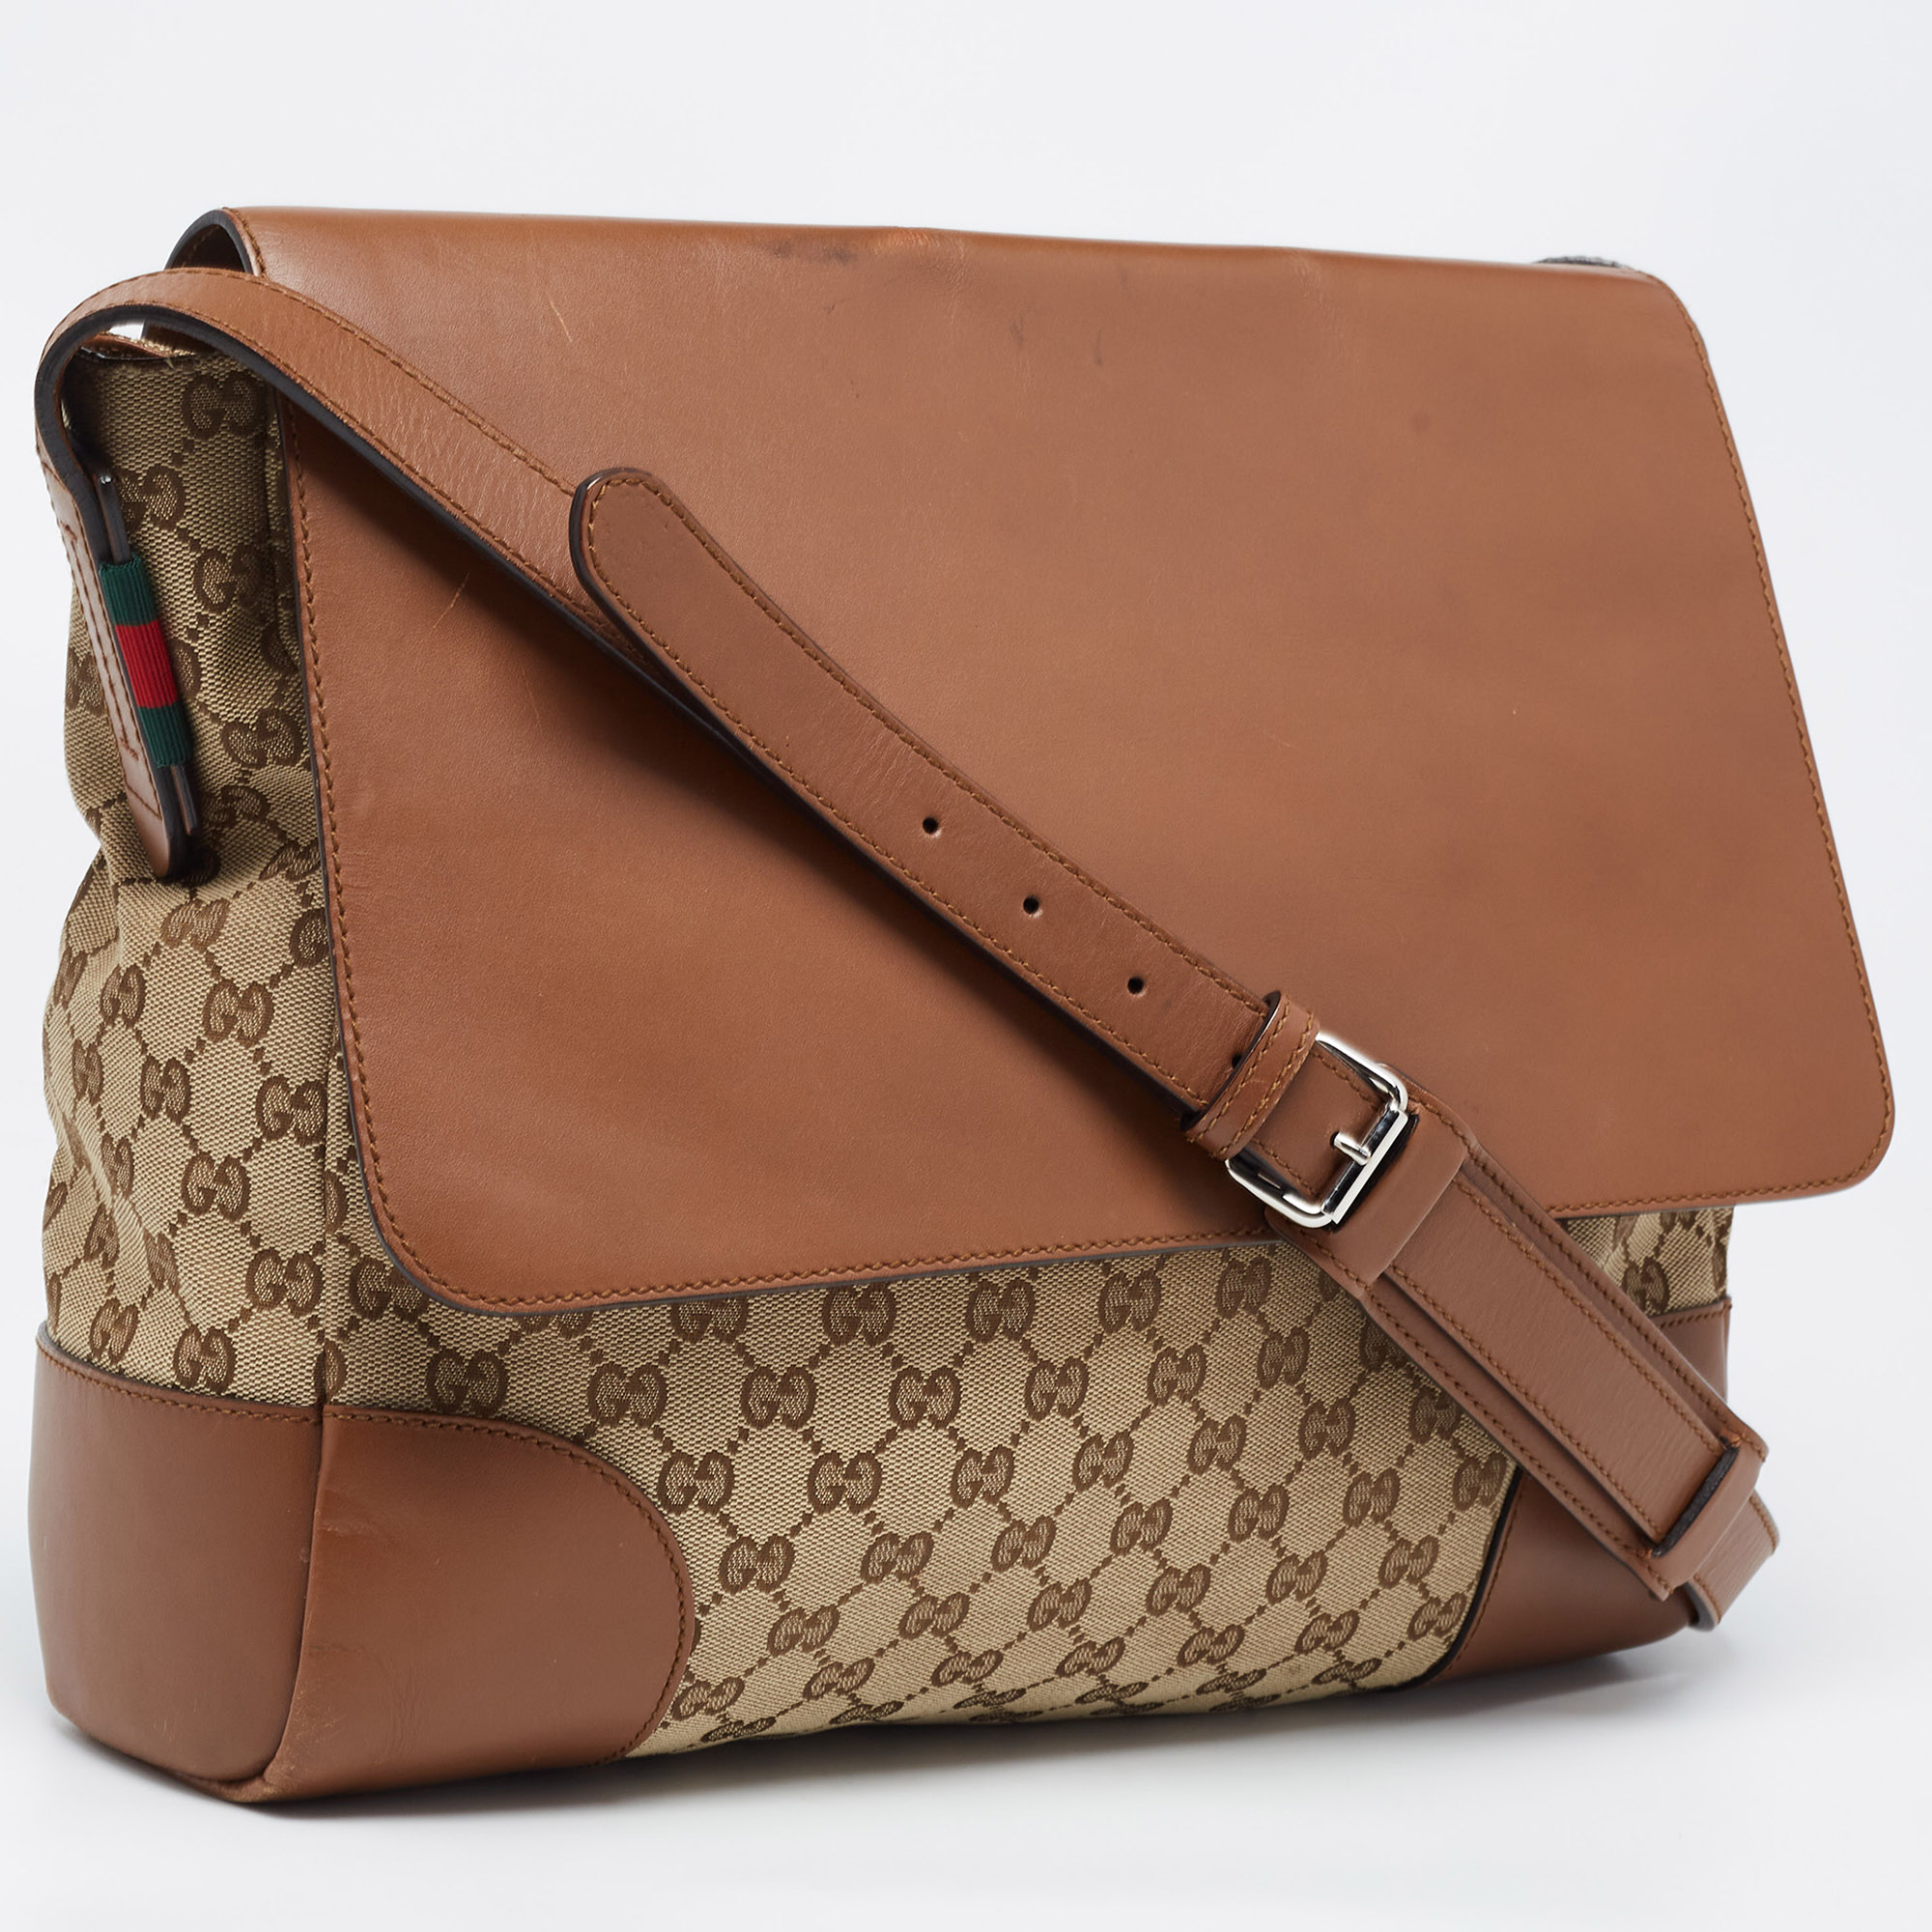 Gucci Brown/Beige GG Canvas And Leather Messenger Bag